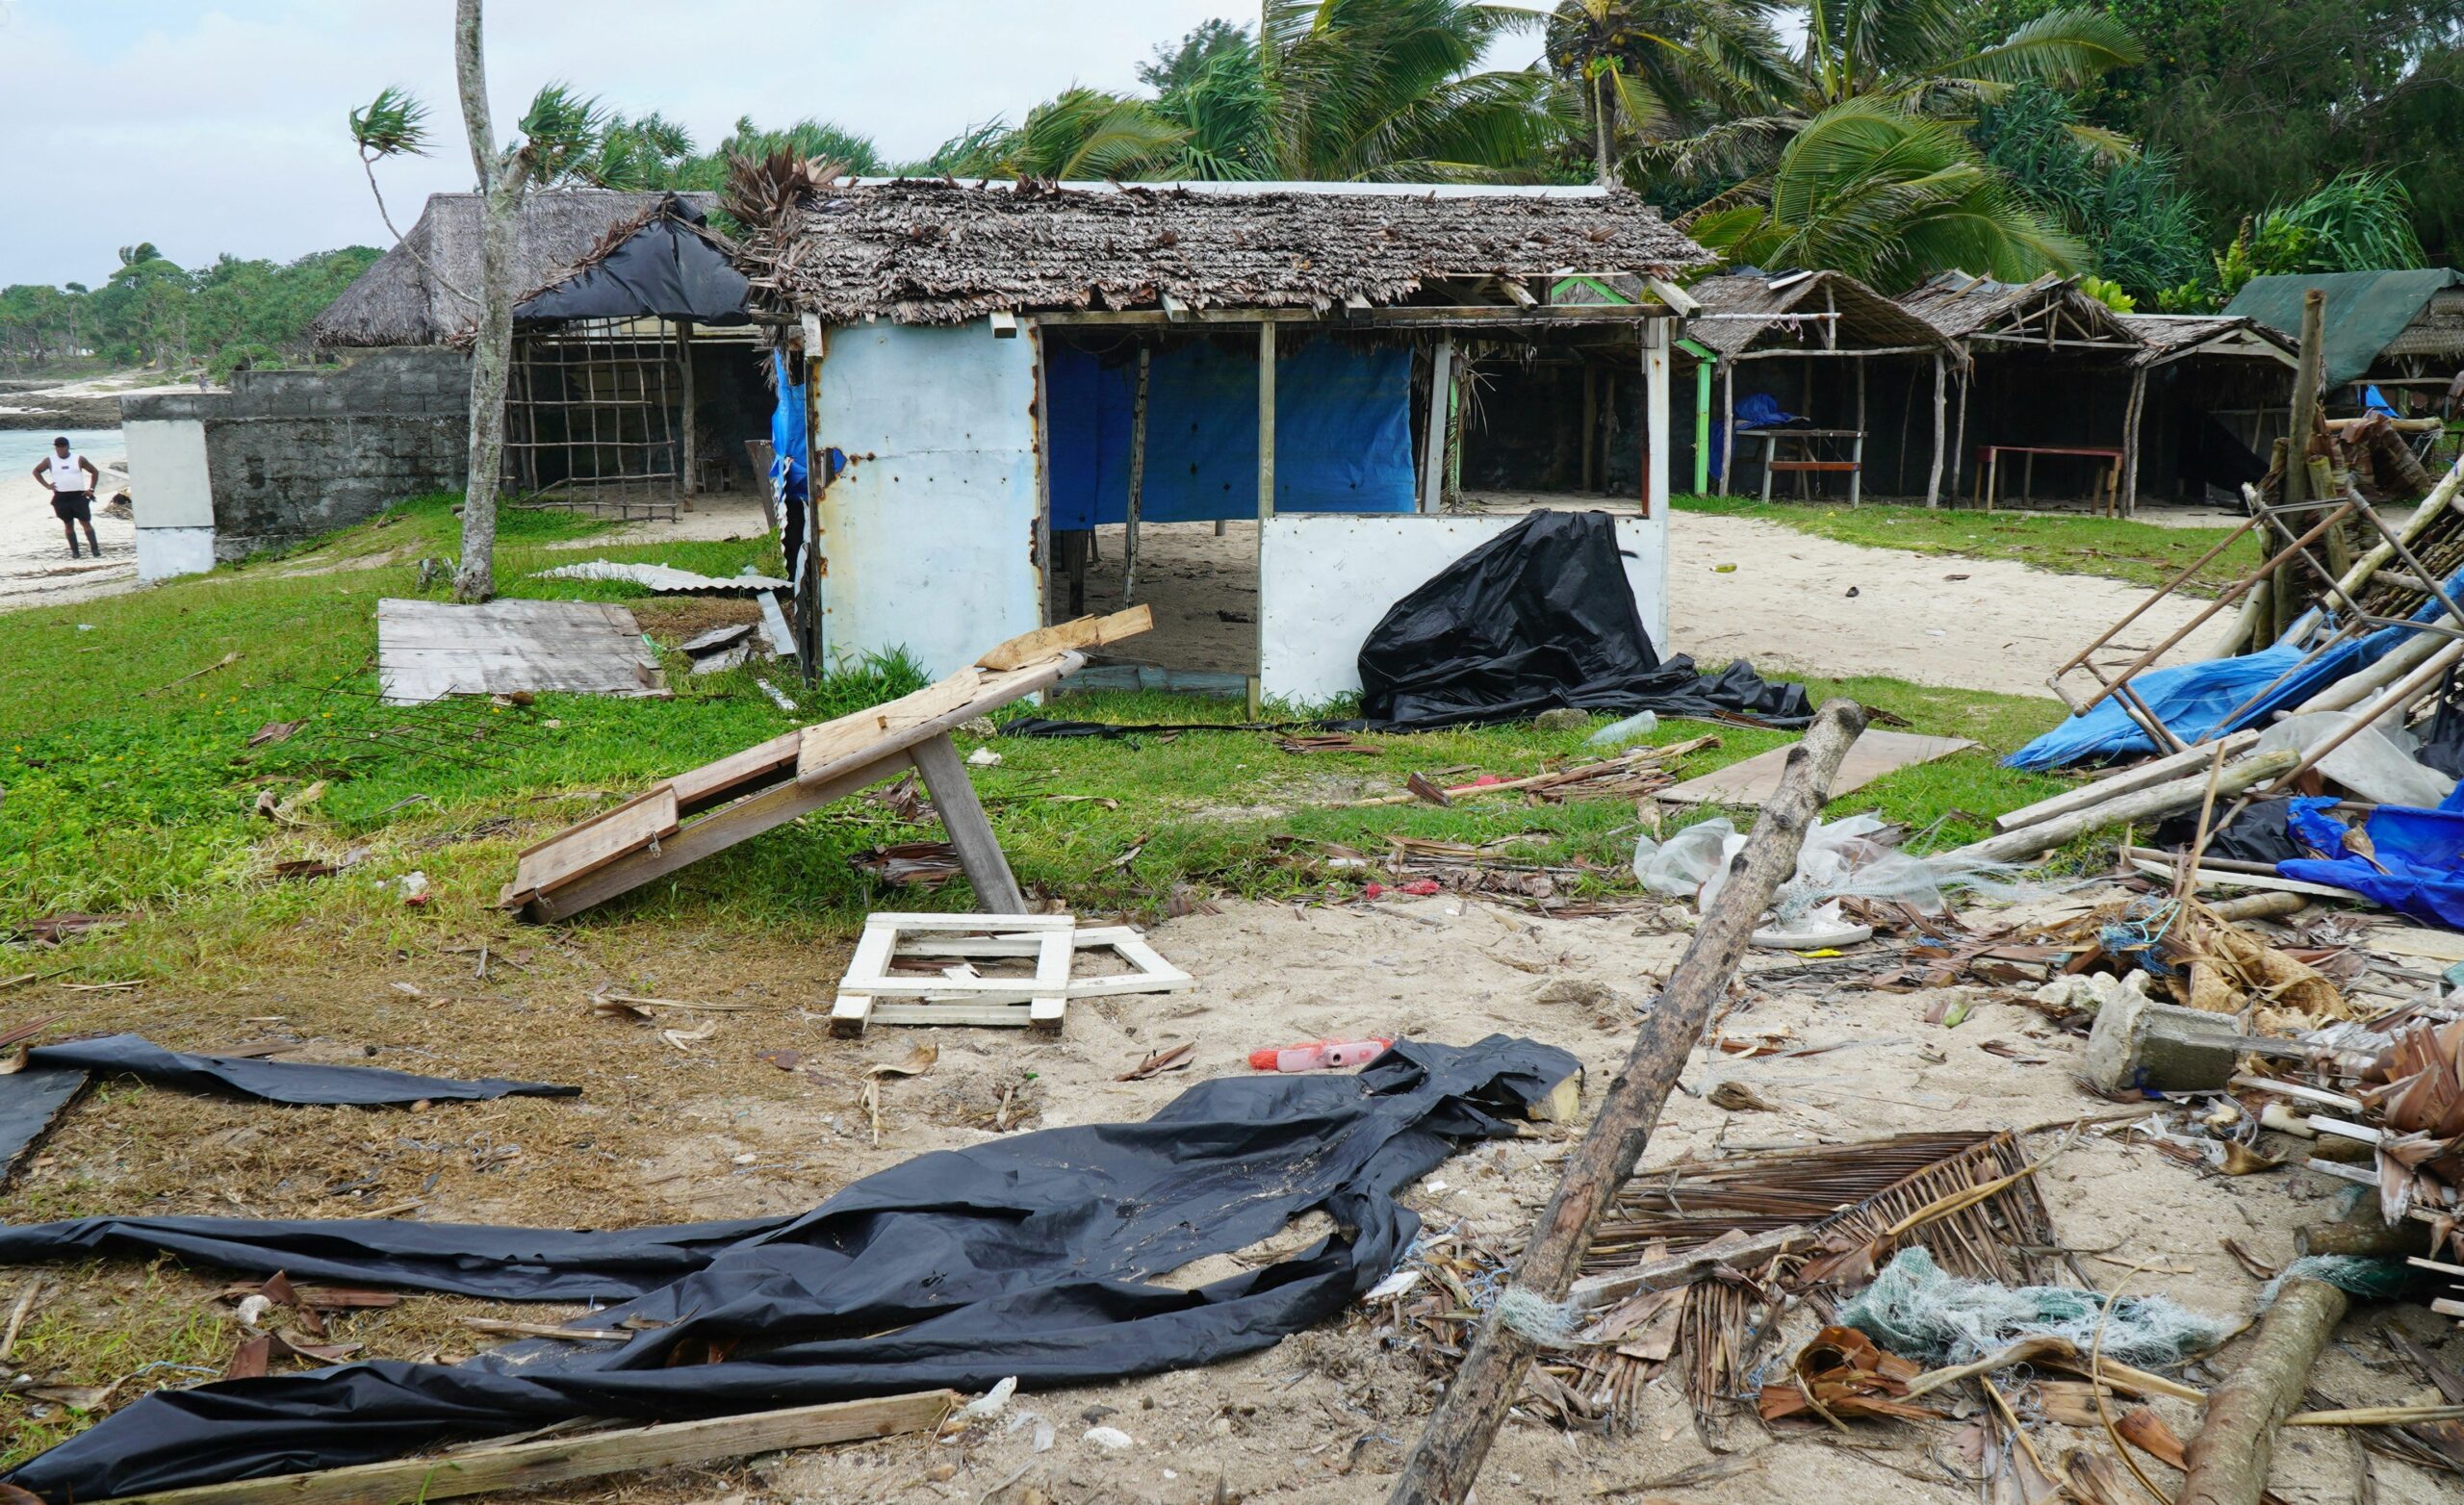 Badly damaged buildings are pictured near Vanuatu's capital of Port Vila on April 7, 2020, after Tropical Cyclone Harold swept past and hit islands to the north. The cyclone caused $600 million in damage, some 60 percent of the small Pacific island nation's GDP. Credit: PHILIPPE CARILLO/AFP via Getty Images.